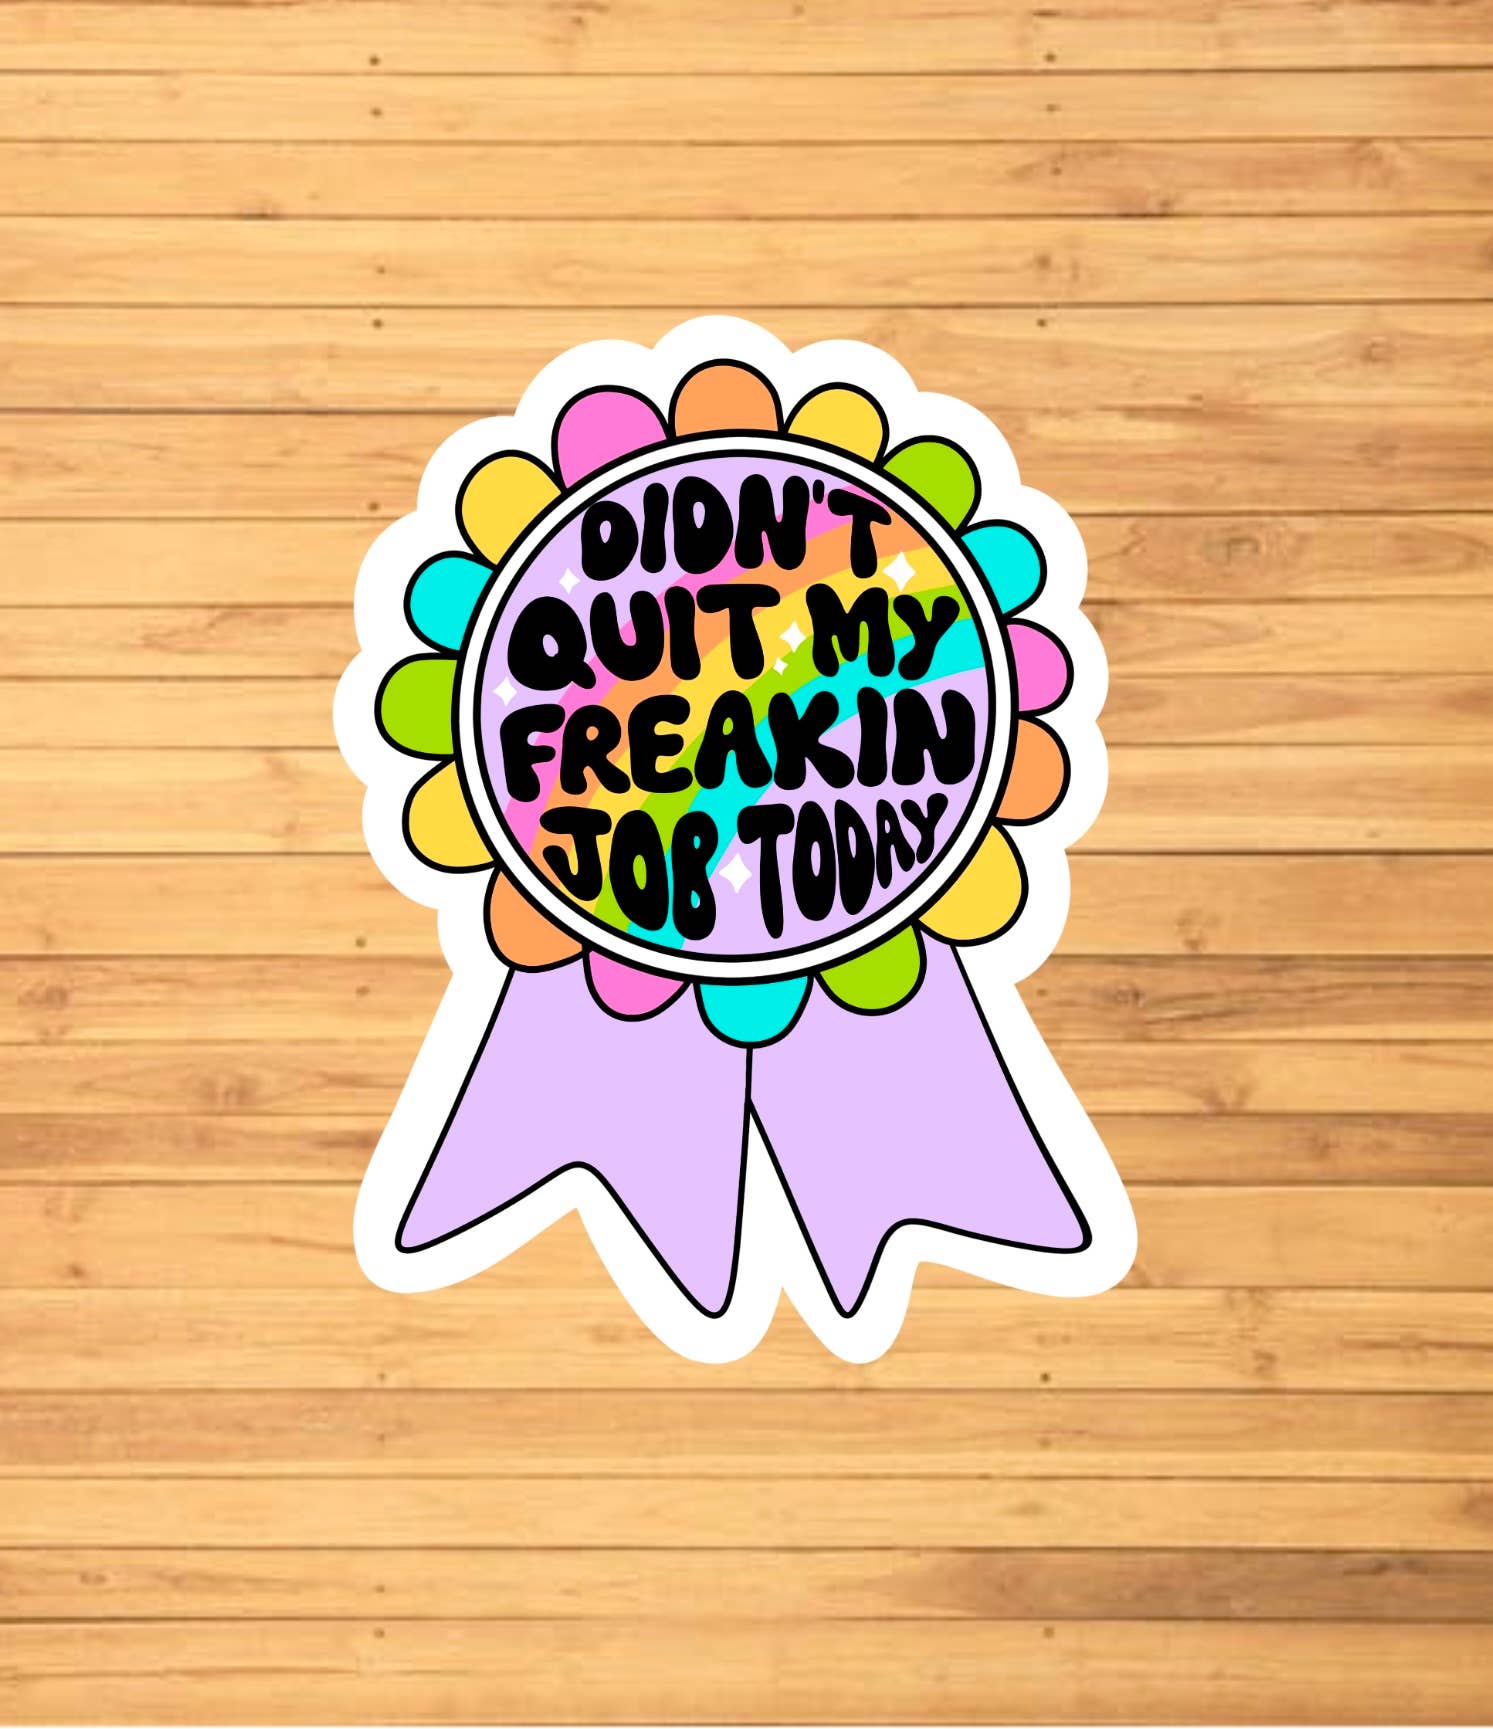 Didn’t Quit My Freakin Job Today Sticker - Storm and Sky Shoppe